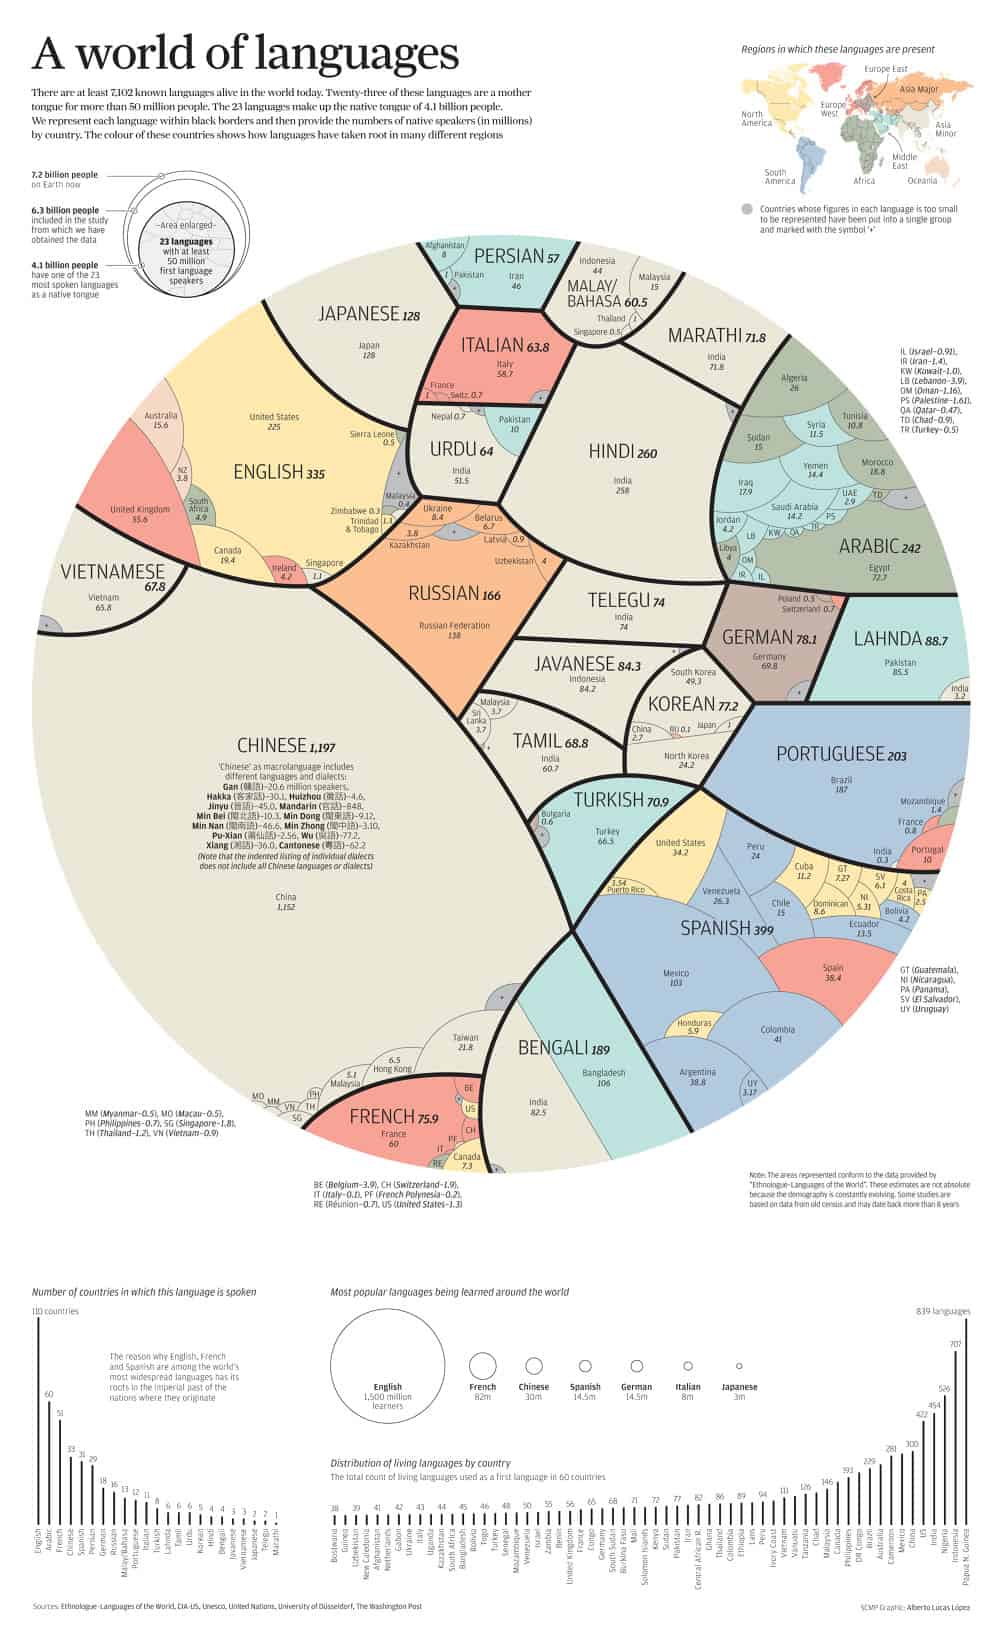 languages-of-the-world-2